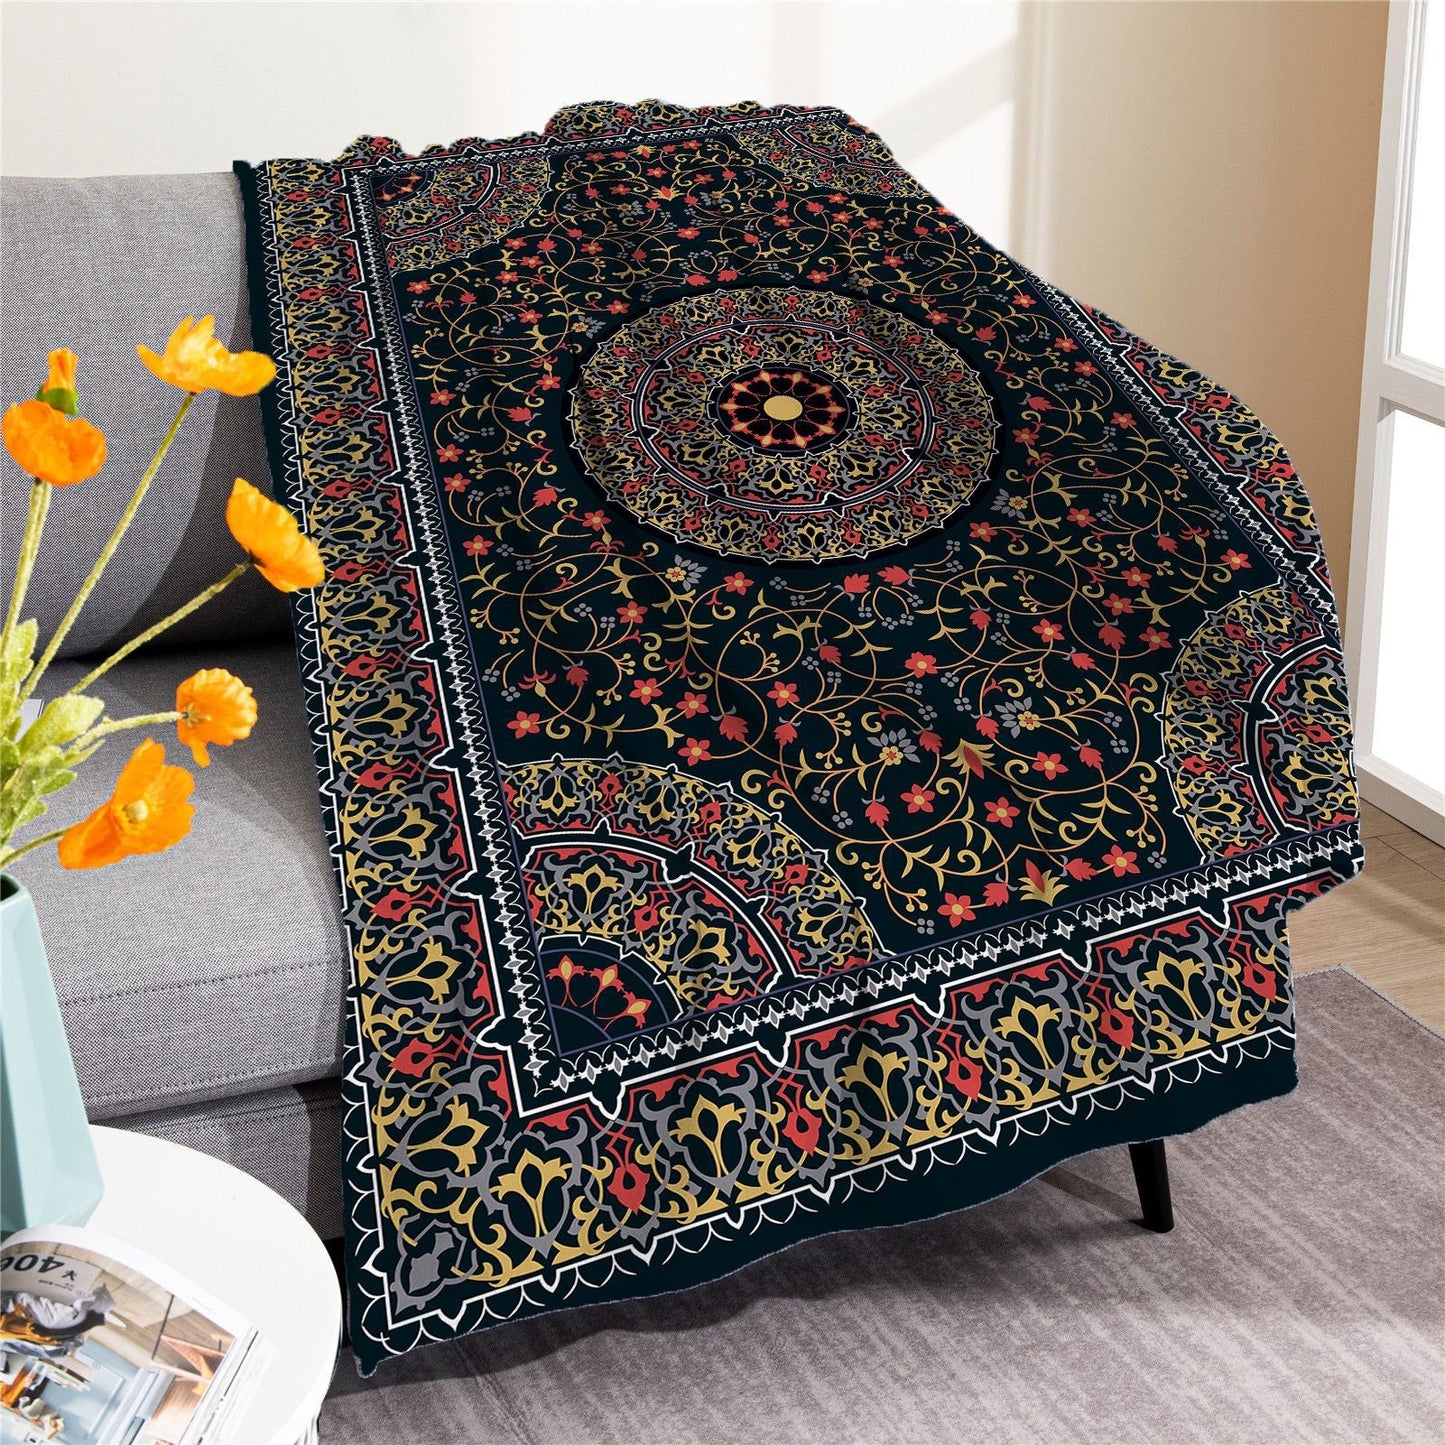 Vintage Boho Fleece Throw Blankets-Blankets-M20220701-8-50*60 Inches-Free Shipping at meselling99